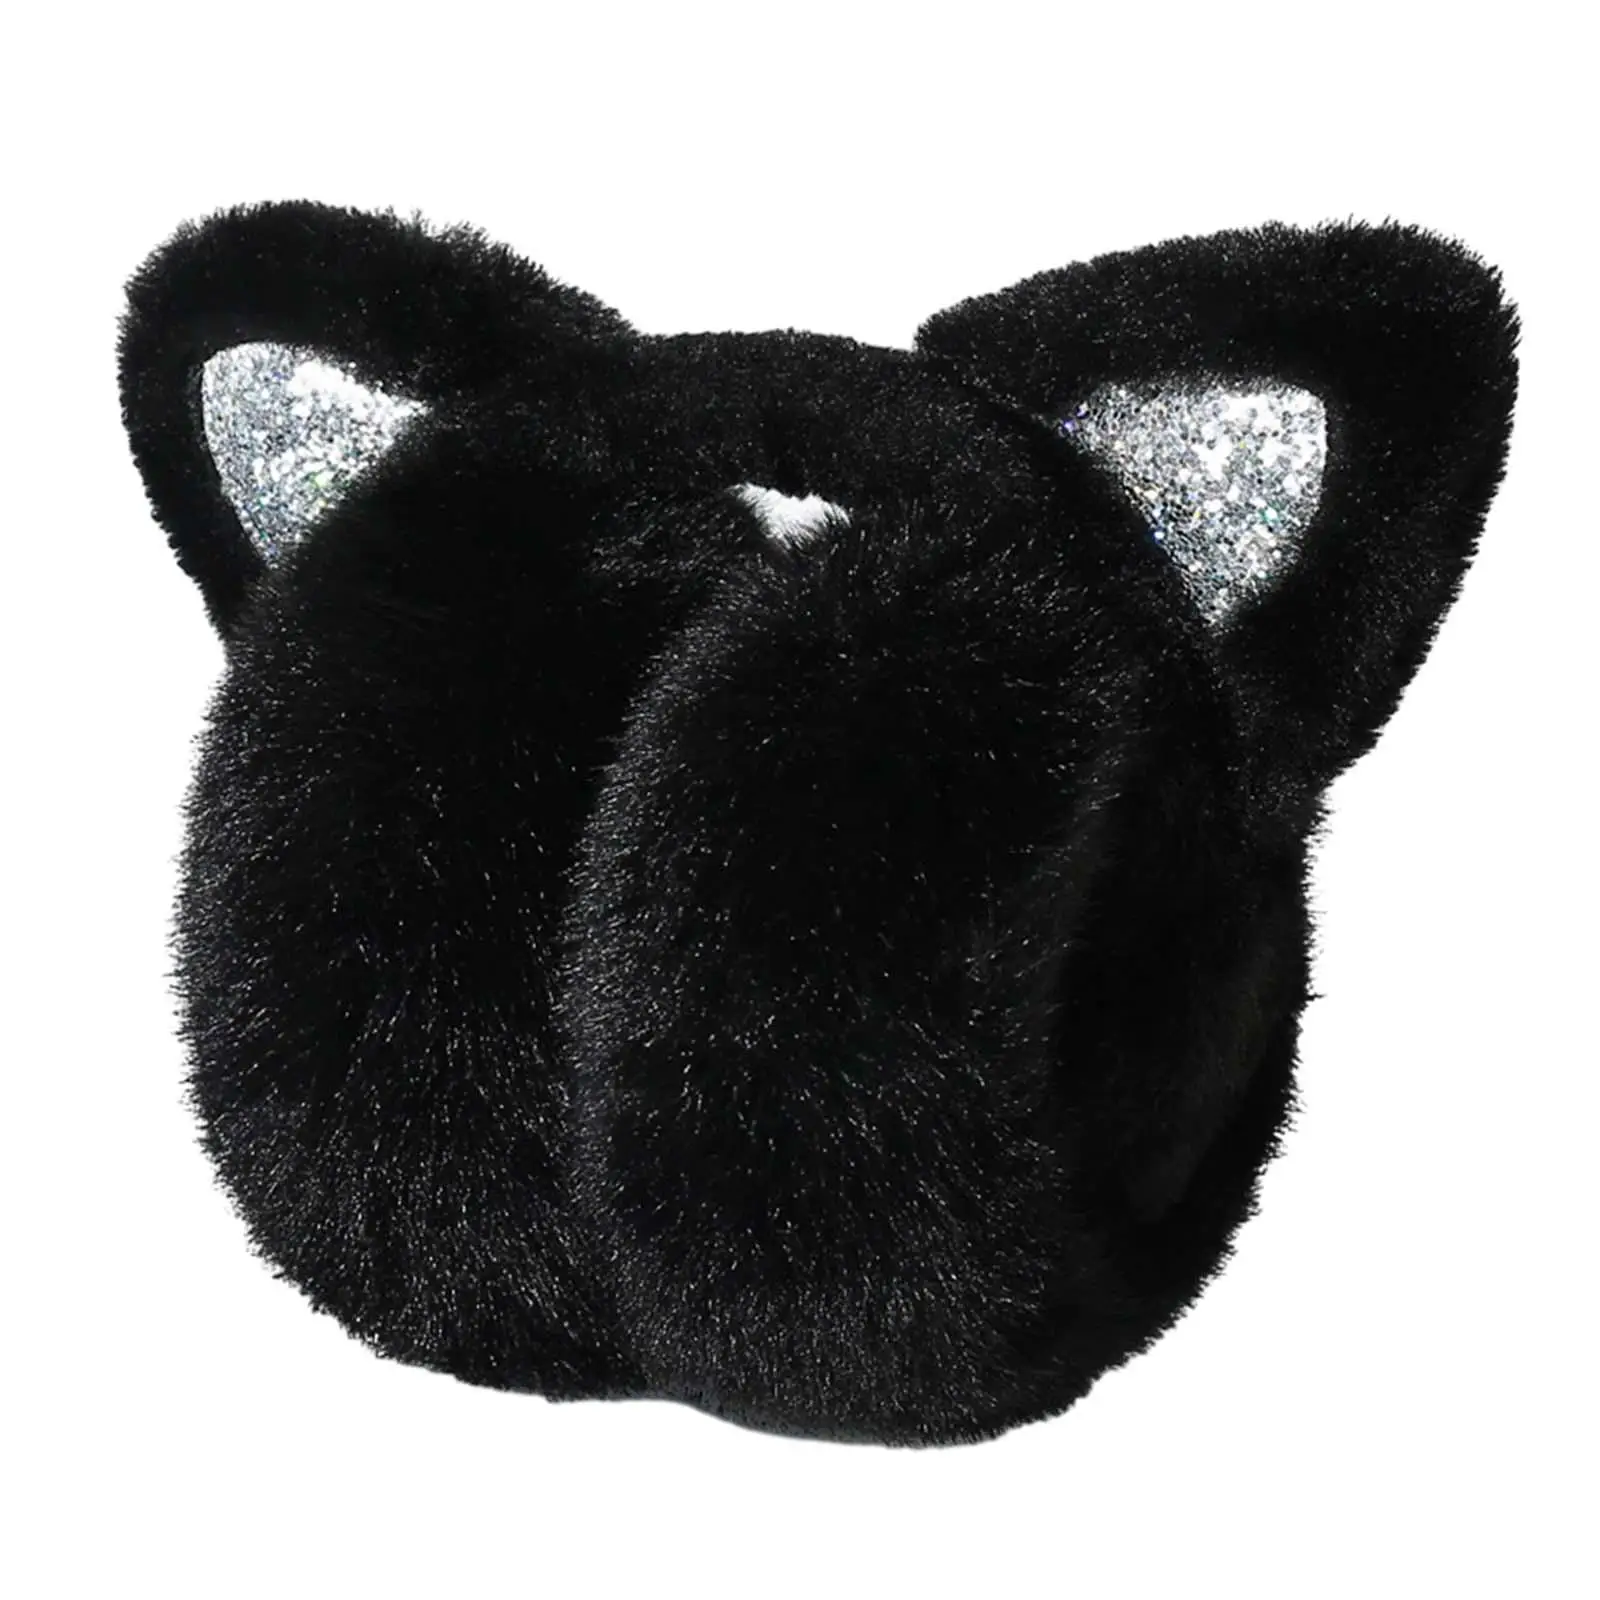 Ear Warmers Folded Warm Soft Winter Ear Muffs Earmuffs Ear Cover for Cold Weather Outdoor Activities Cycling Skiing Traveling